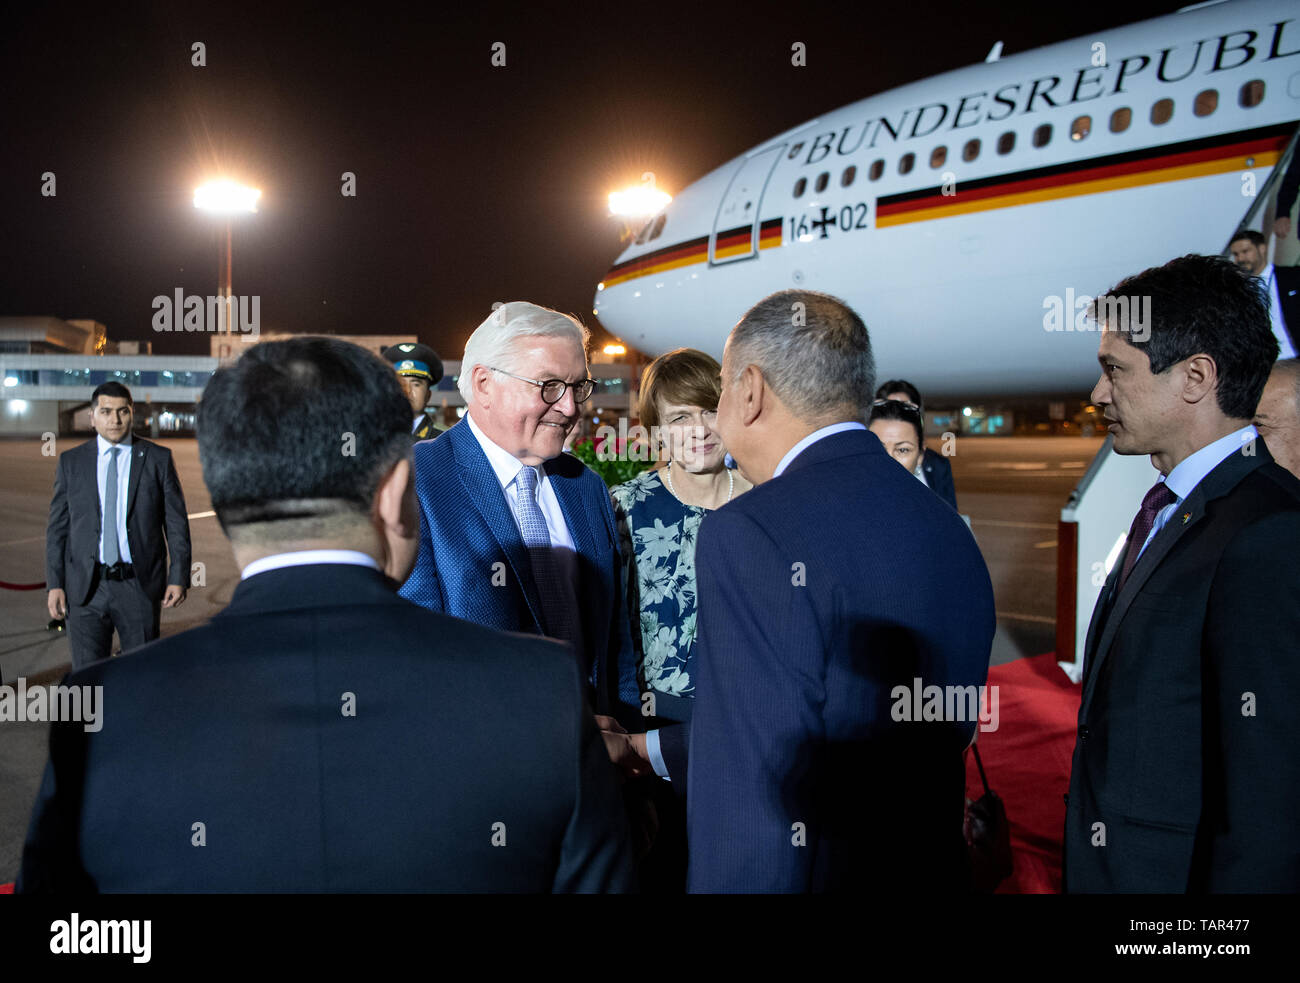 Taschkent, Uzbekistan. 27th May, 2019. President Frank-Walter Steinmeier (3rd from left) and his wife Elke Büdenbender arrive at Yushny International Tashkent Airport and are welcomed there by Abdulasis Kamilov (2nd from right), Foreign Minister of Uzbekistan. President Steinmeier and his wife are on a two-day state visit to Uzbekistan. They are accompanied by numerous business representatives and cultural workers. Credit: Bernd von Jutrczenka/dpa/Alamy Live News Stock Photo